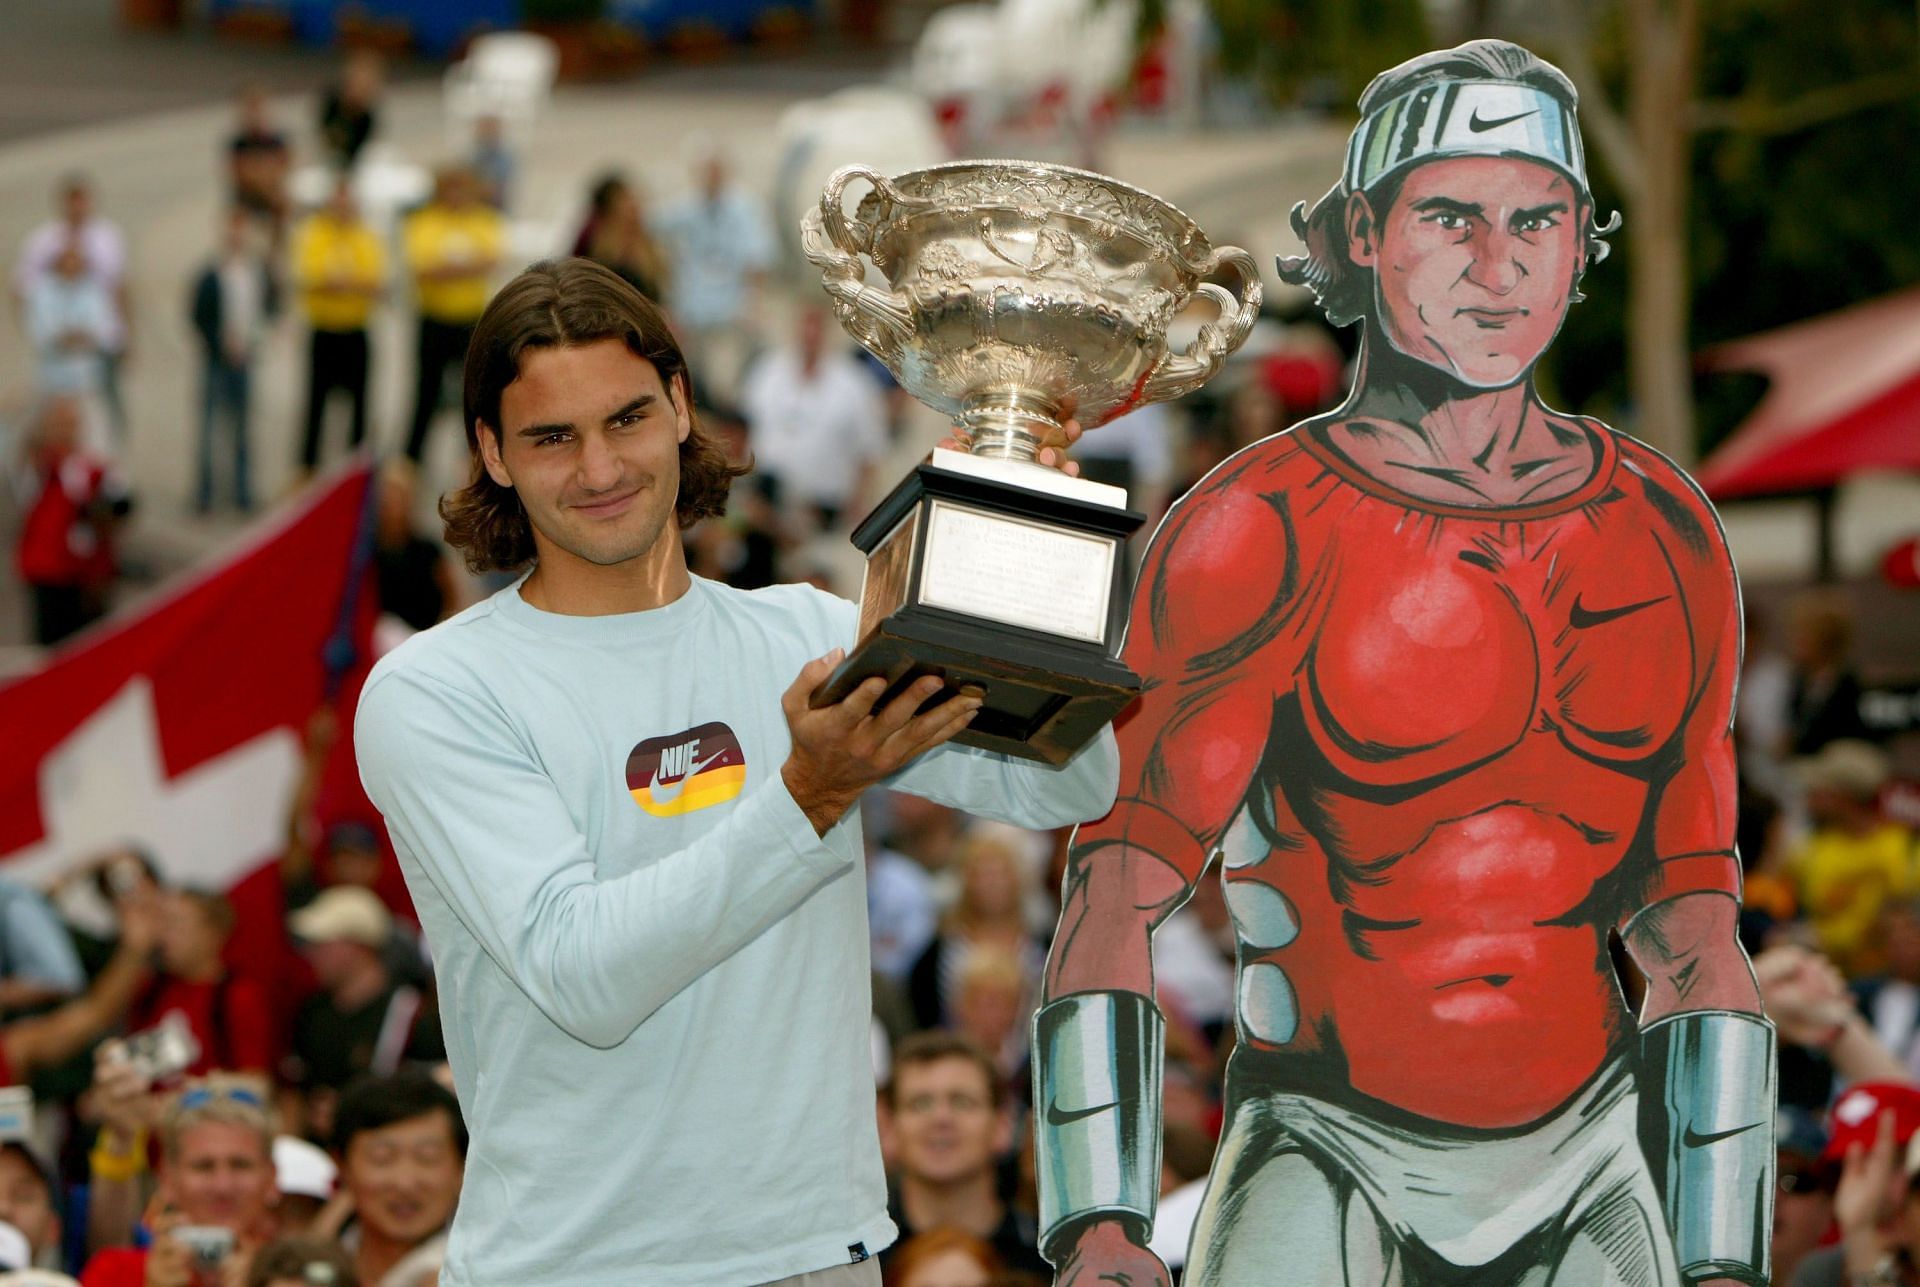 Roger Federer had only two Slam titles when Nadal failed to reach a clay Masters 1000 final in 2004